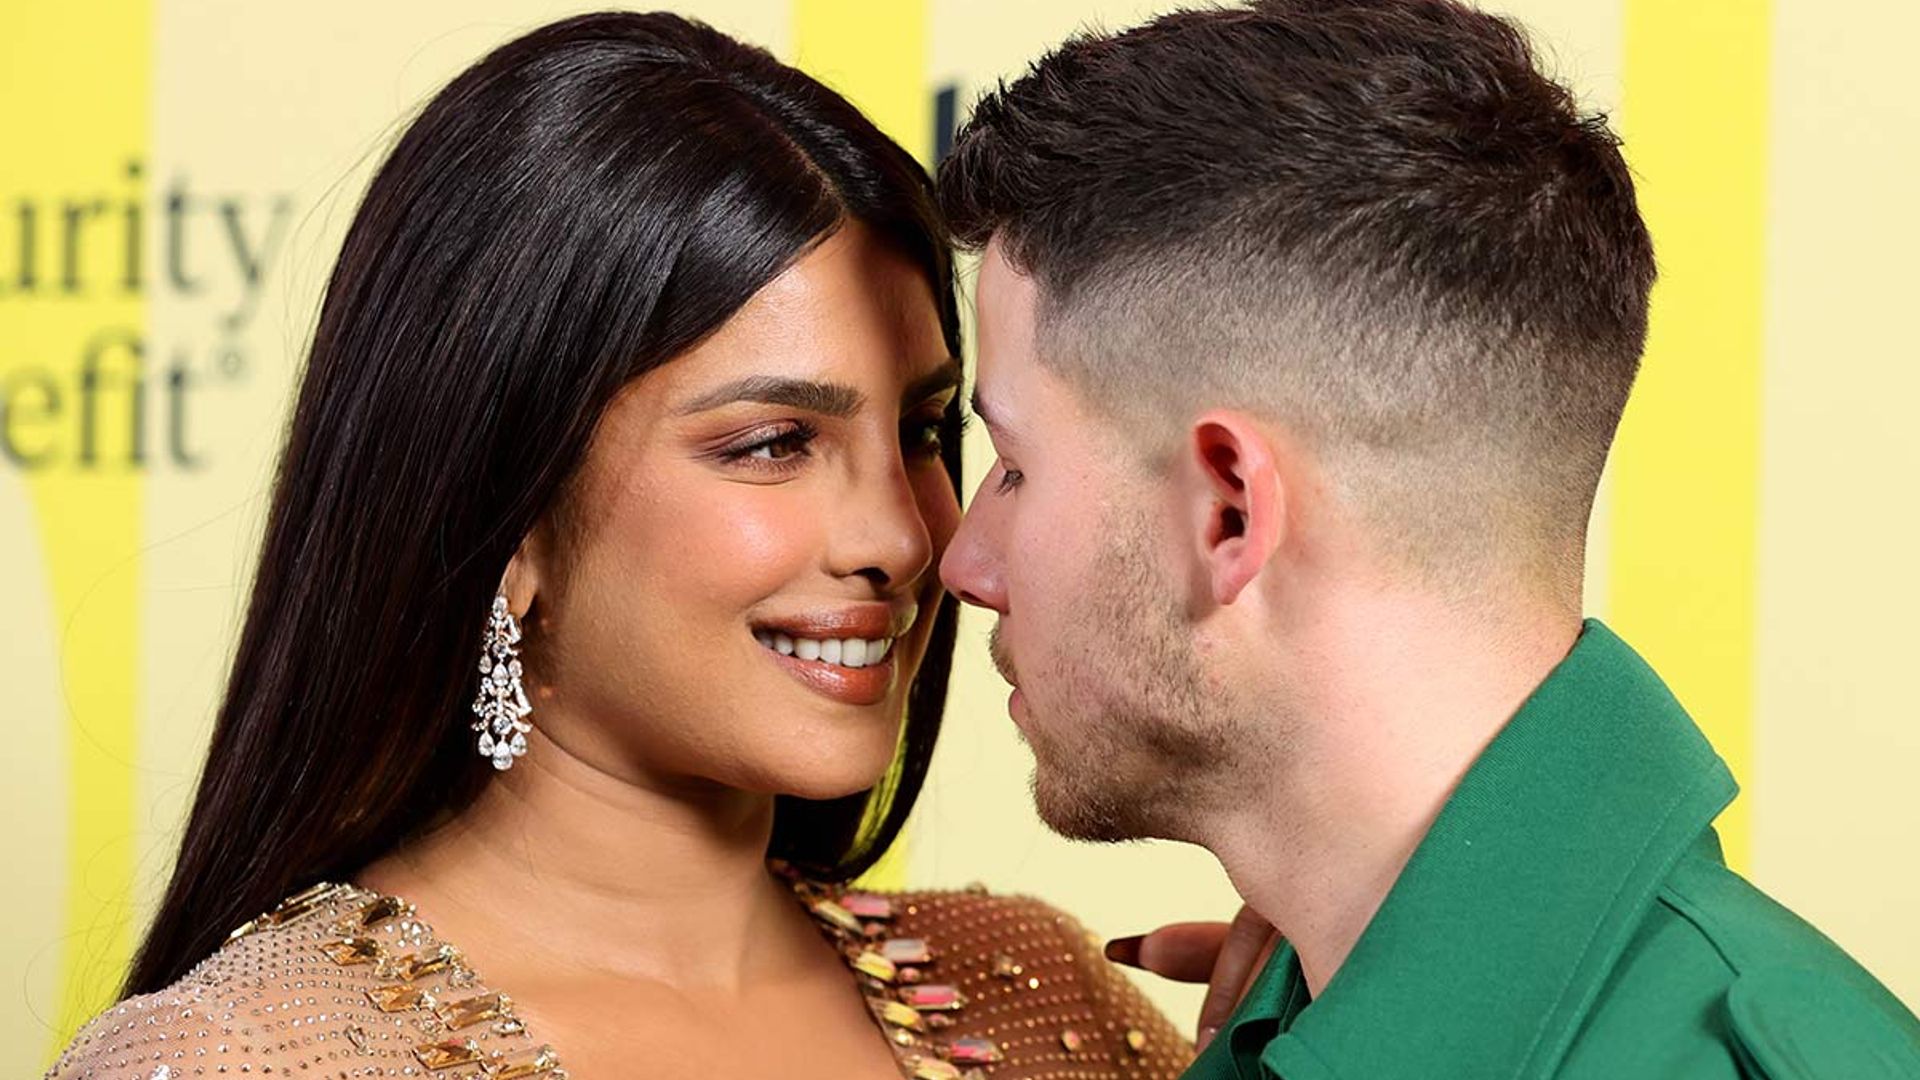 Dailyhunt - In an interview the actress said that her engagement ring is  the most stunning jewellery that she owns Read more here:  http://dhunt.in/obXqC?s=a&uu=0x1cb0ff02bb94b6c6&ss=pd #PriyankaChopra  #dailyhunt | Facebook